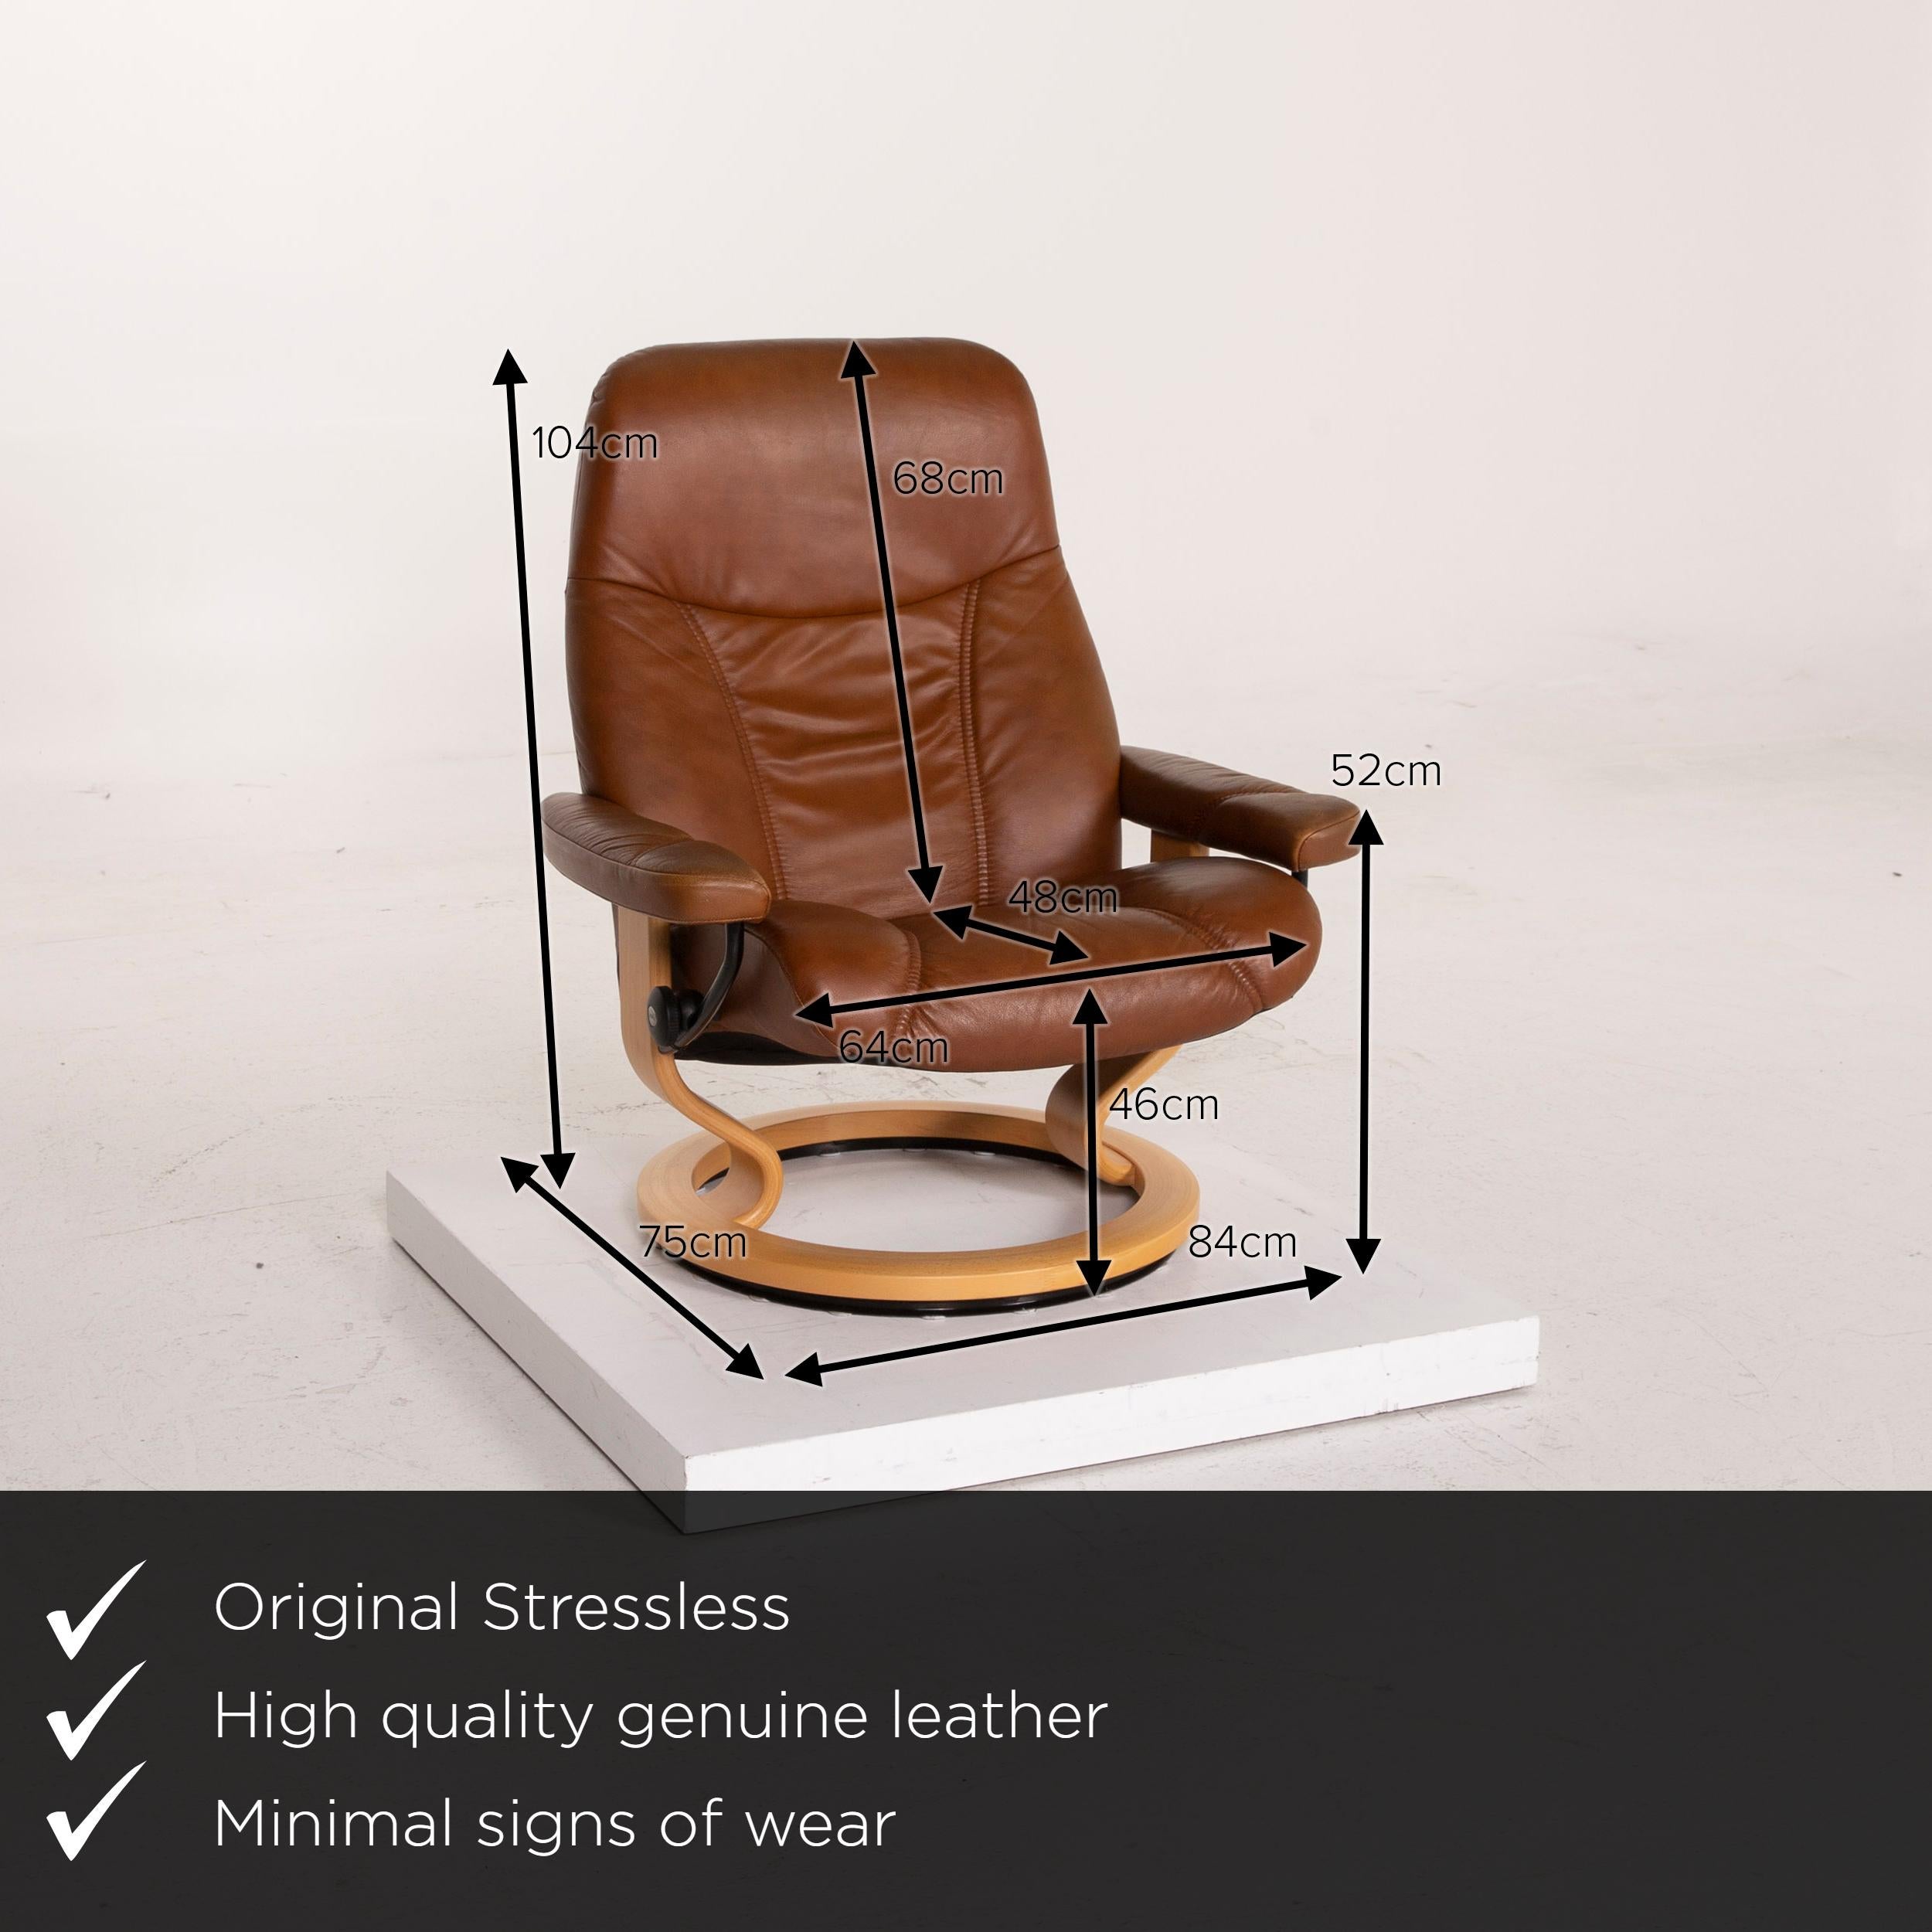 We present to you a Stressless Consul leather armchair cognac incl. Ottoman relaxation function.
 

 Product measurements in centimeters:
 

Depth 75
Width 84
Height 104
Seat height 46
Rest height 52
Seat depth 48
Seat width 64
Back